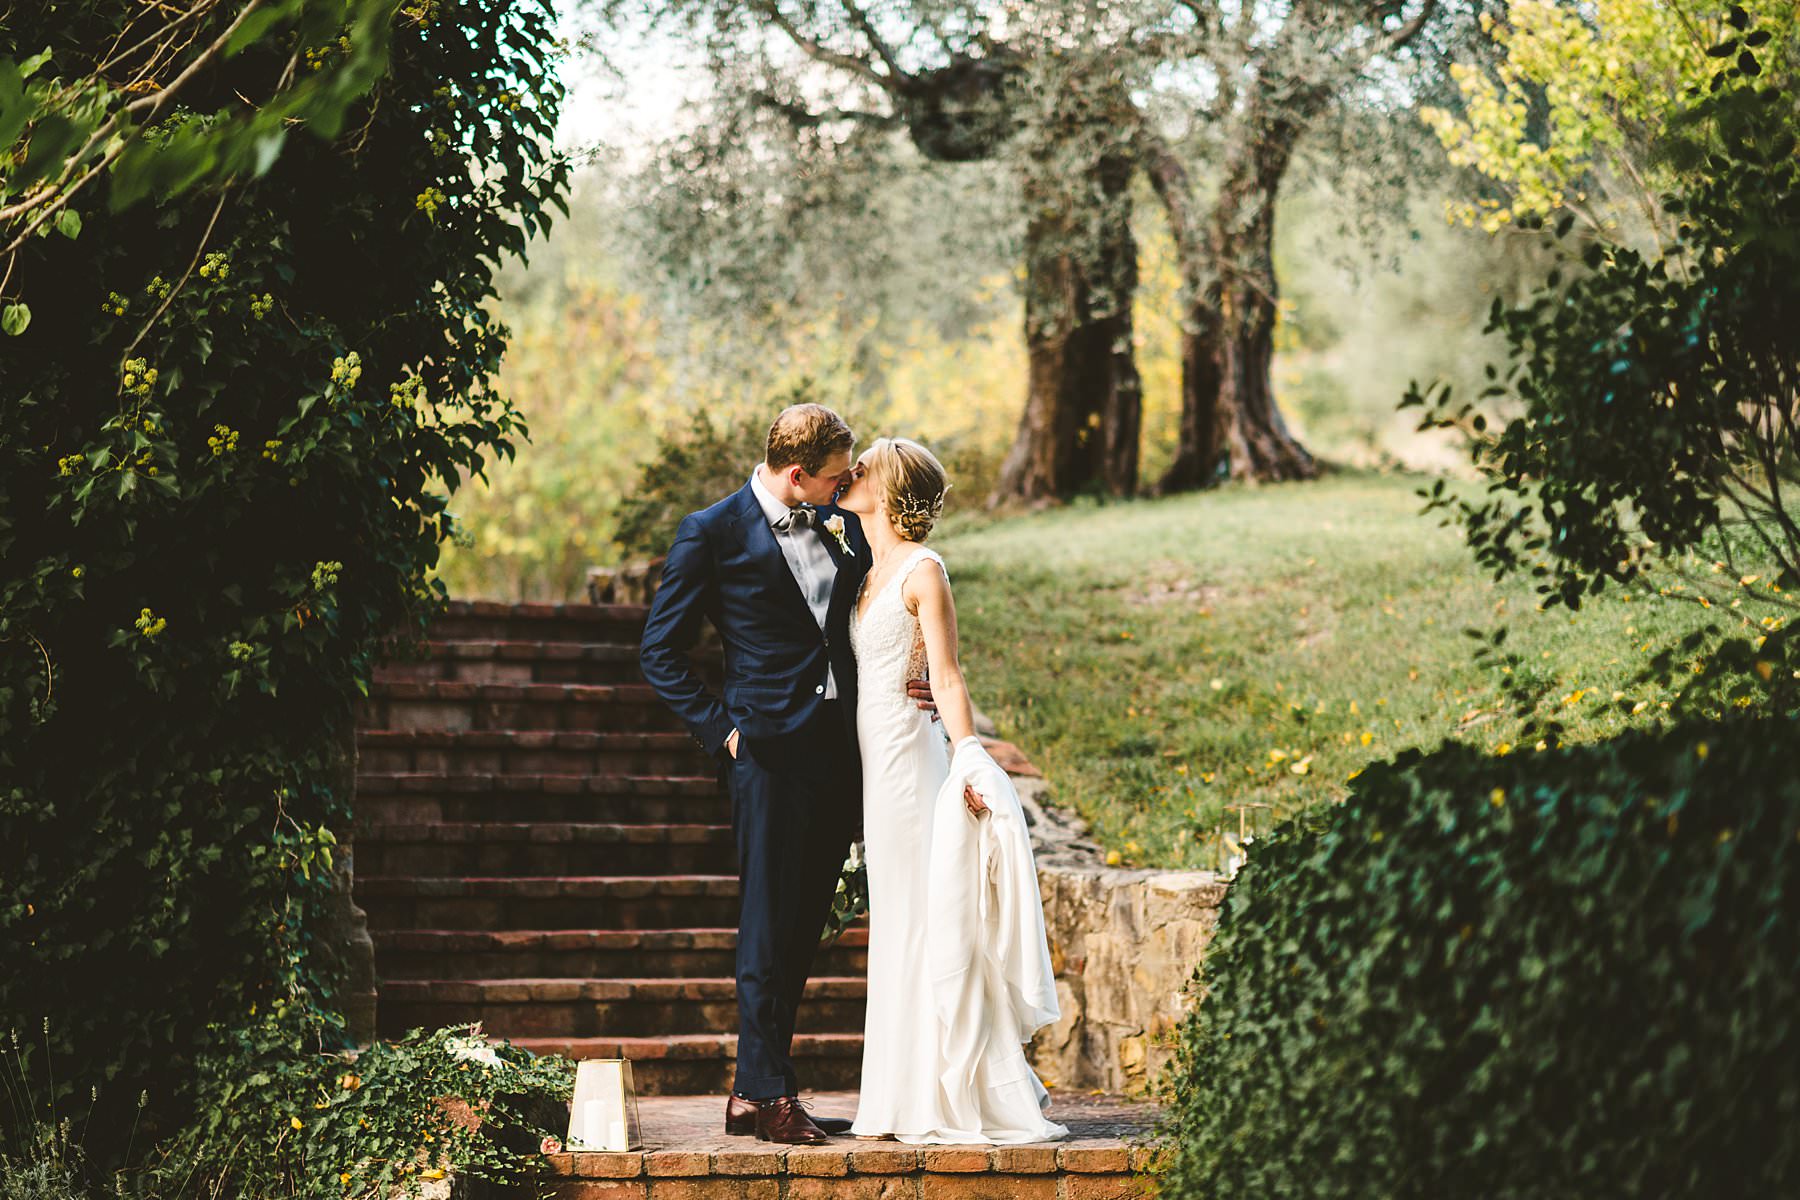 A special international wedding in the countryside of Umbria, Italy. Elegant Australian wedding couple portrait around the property of Villa Monte Solare, a historic residence tucked in the countryside among rolling hills. The settings were countryside landscapes with cypress lines, olive groves and a stunning wall covered in red ivy leaves